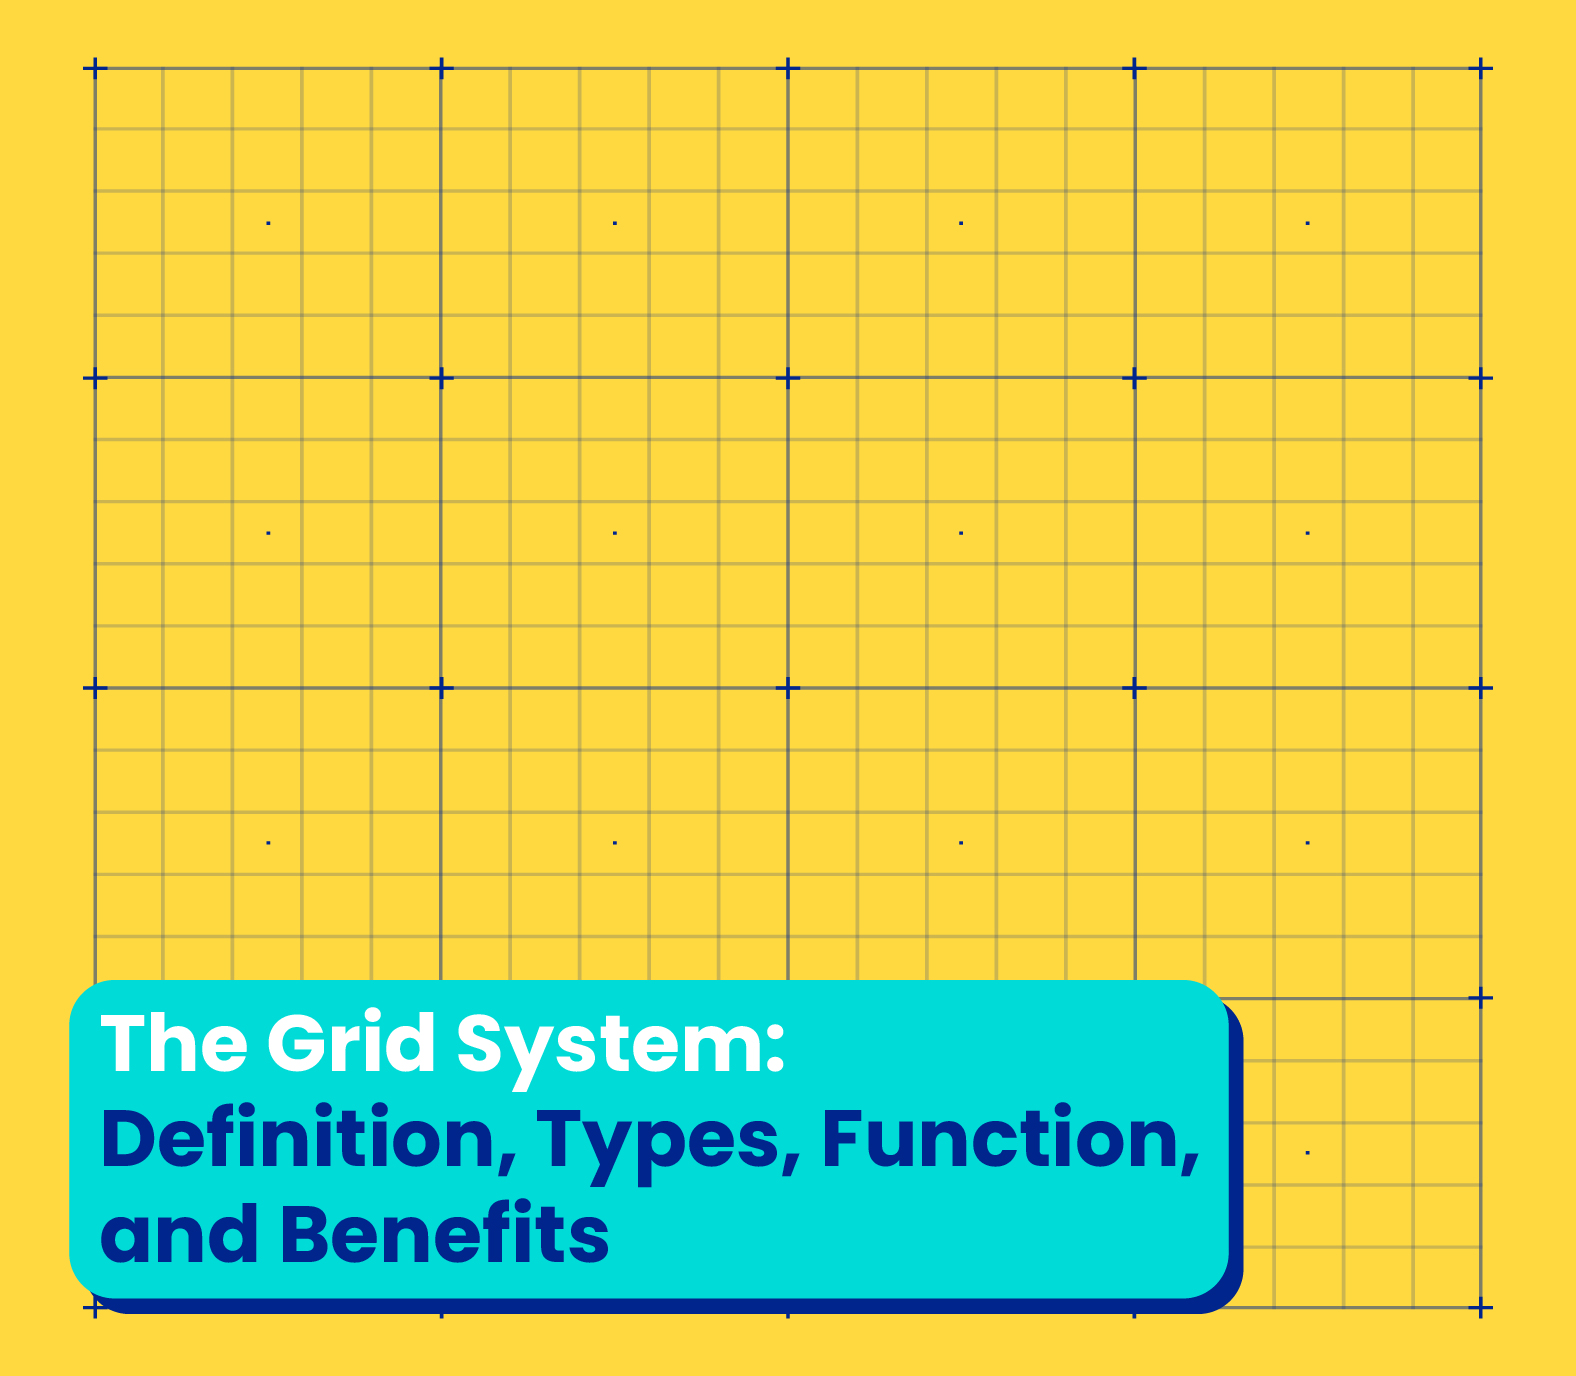 The Grid System: Definition, Types, Function, and Benefits